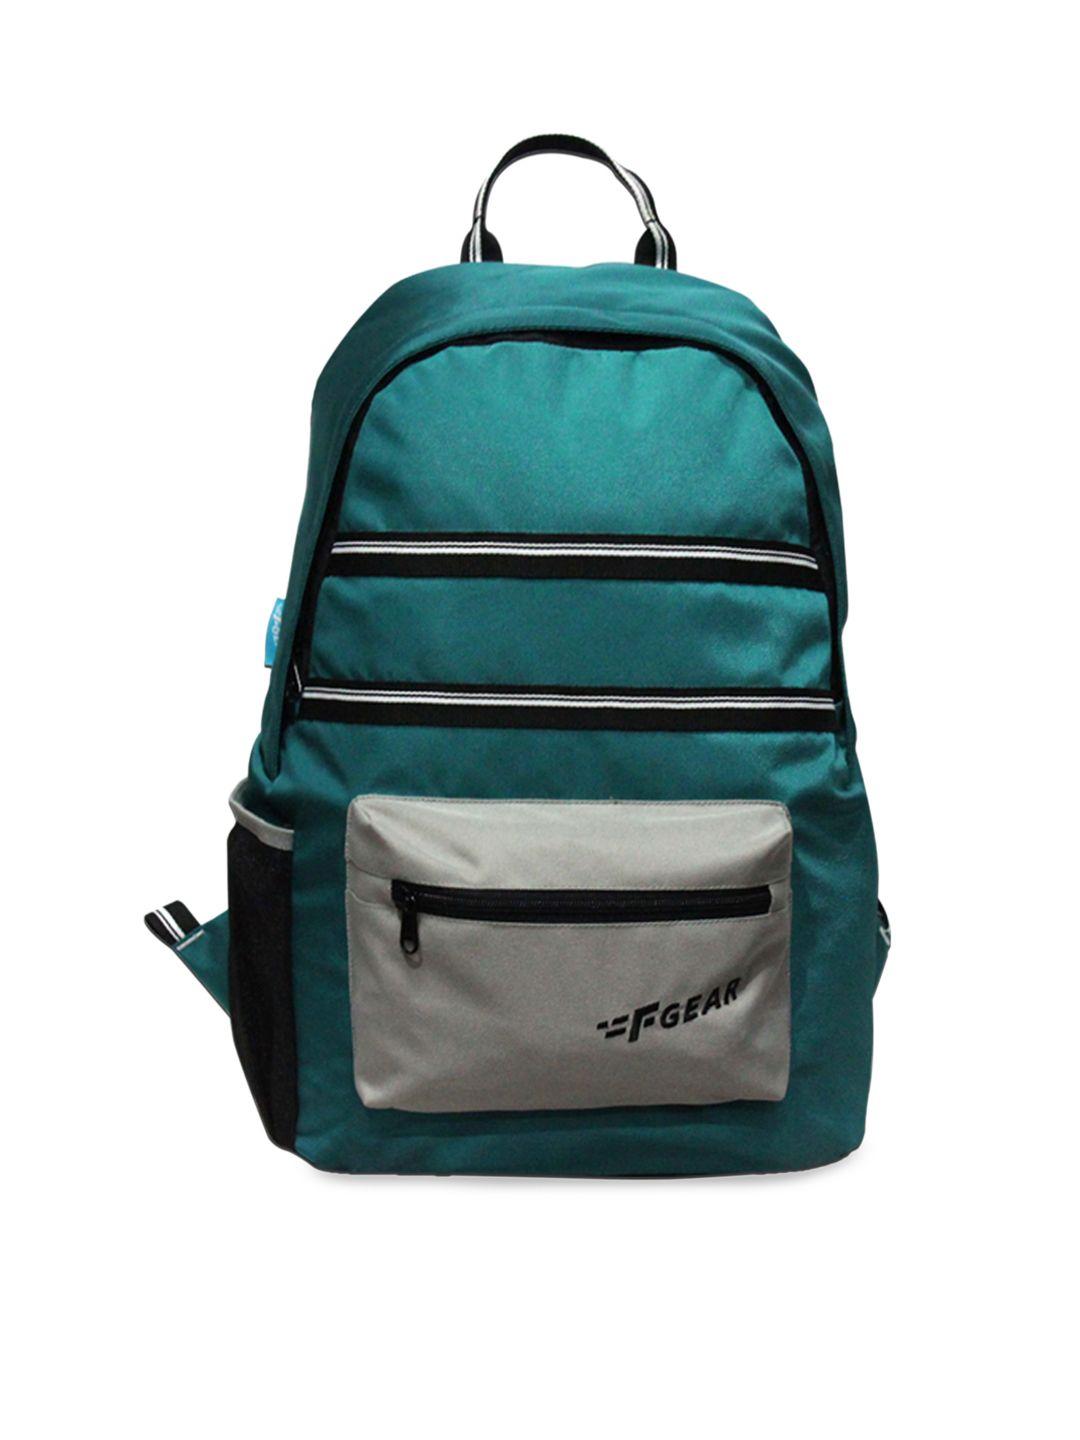 f gear unisex turquoise blue solid backpack